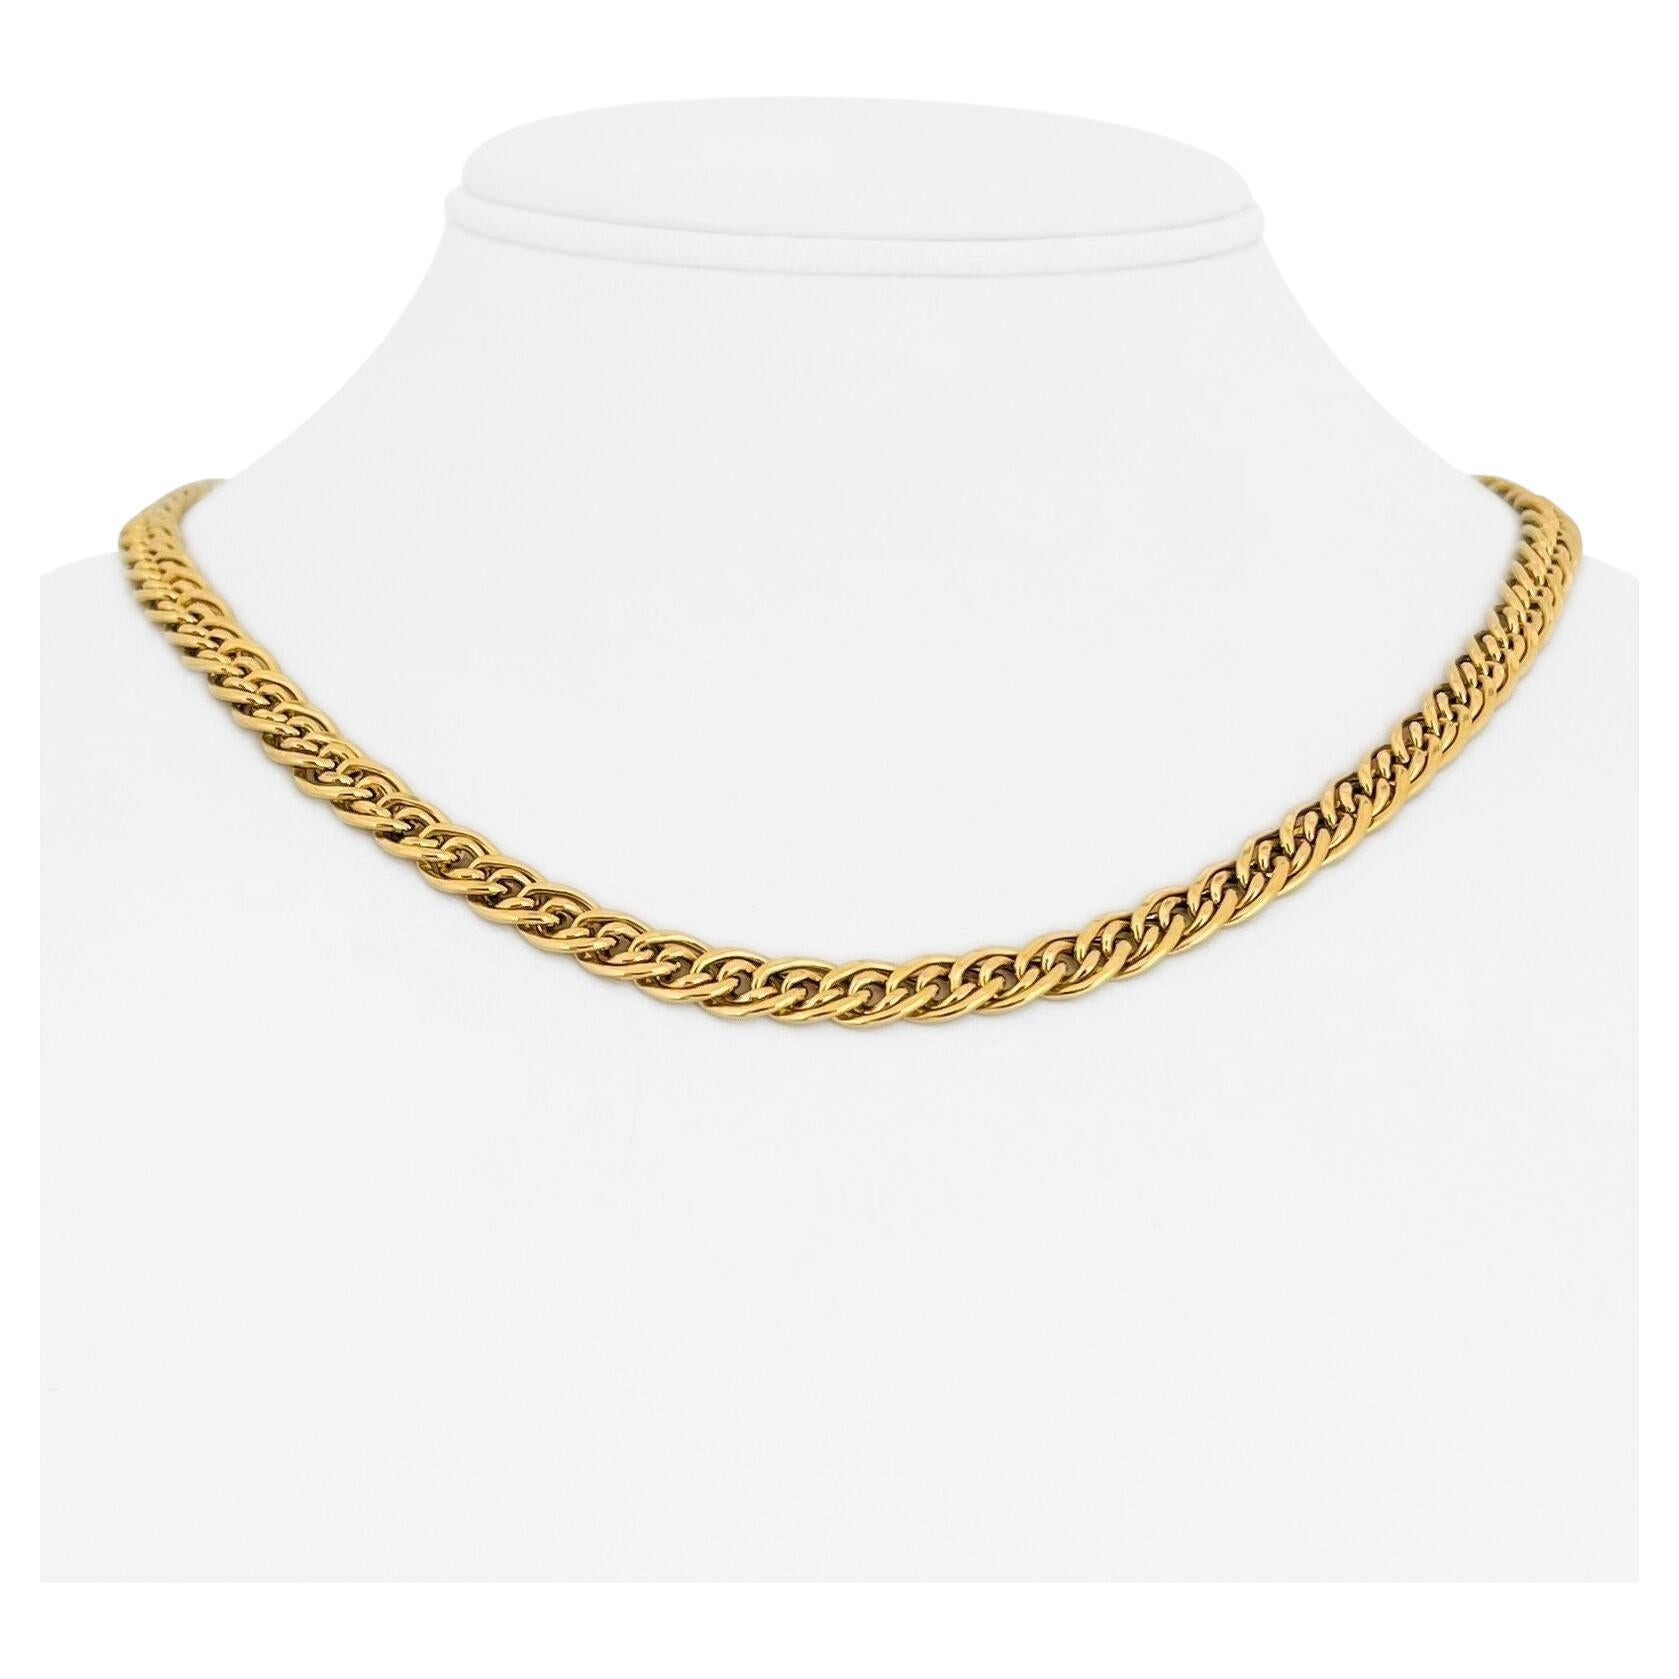 18 Karat Yellow Gold Ladies Fancy Curb Link Chain Necklace Italy